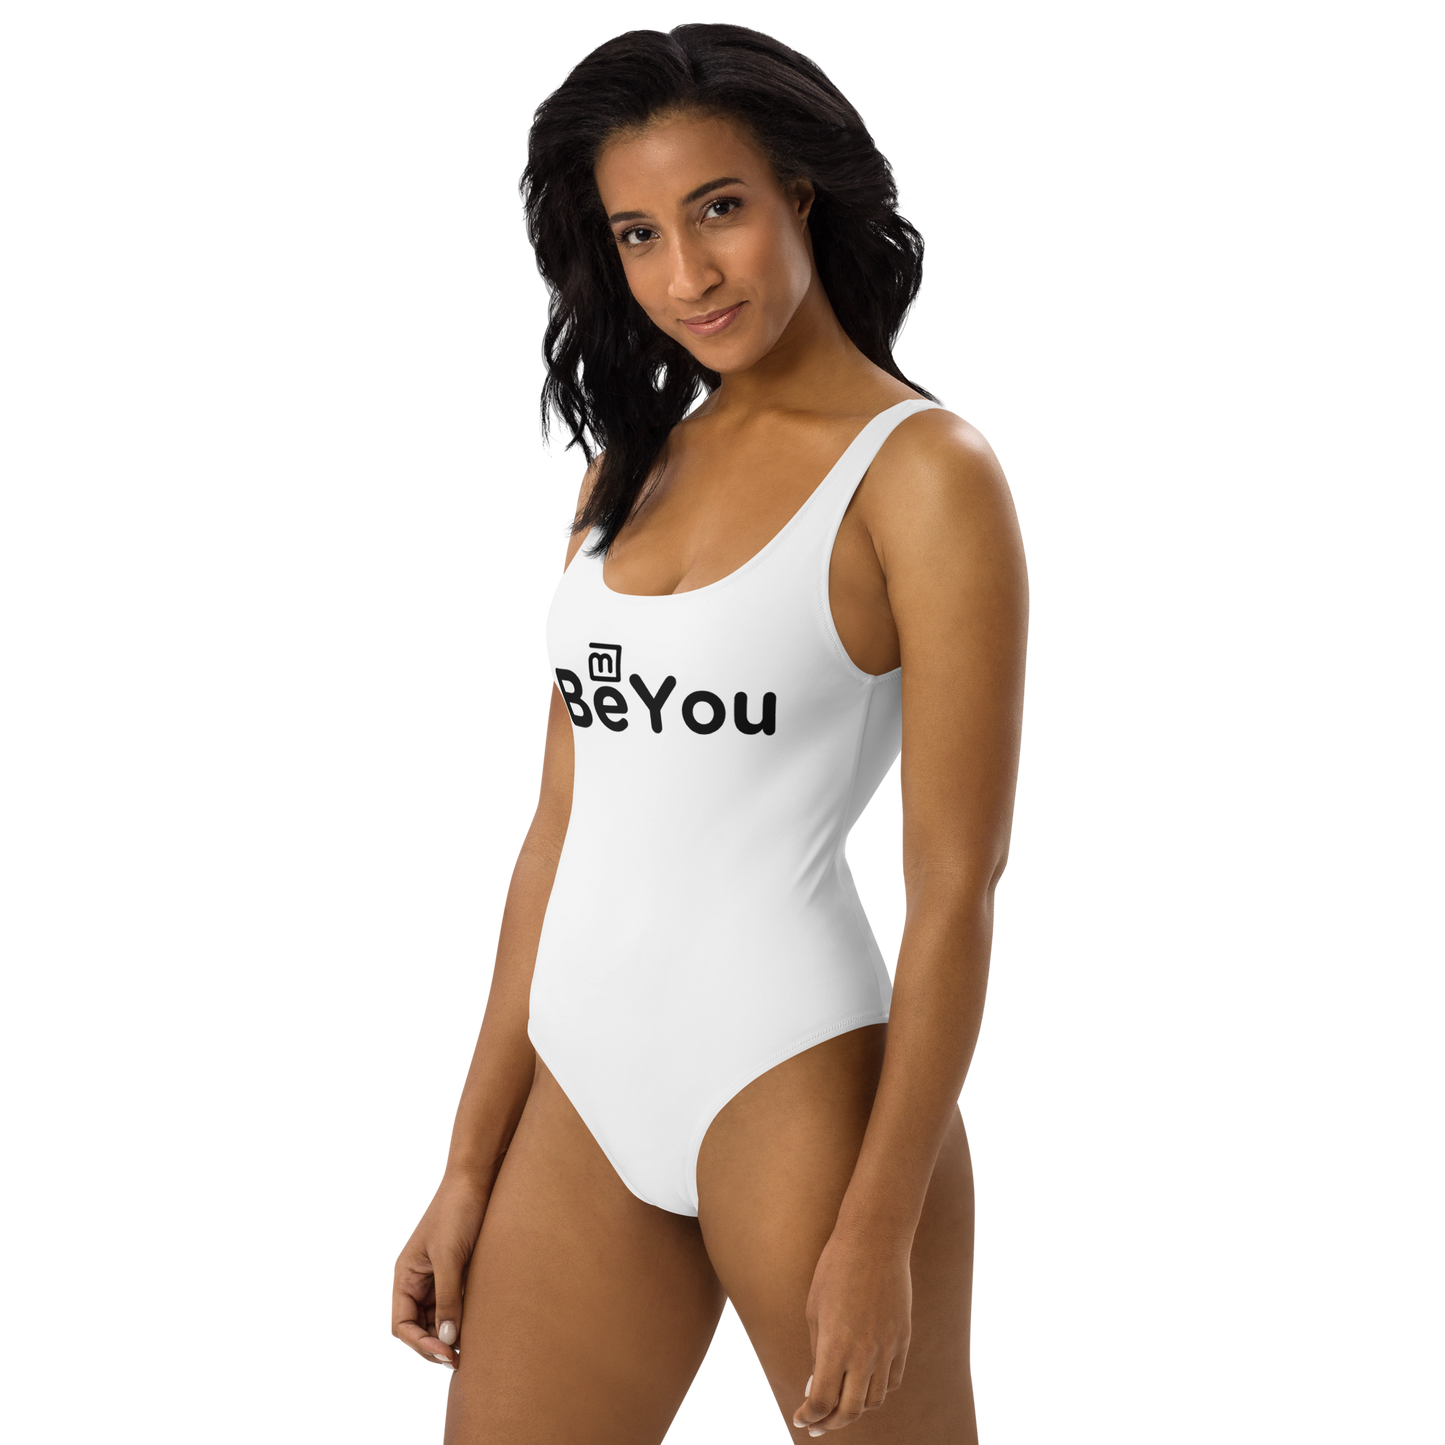 White One-Piece Body Shaper BeYou Performance Swimsuit